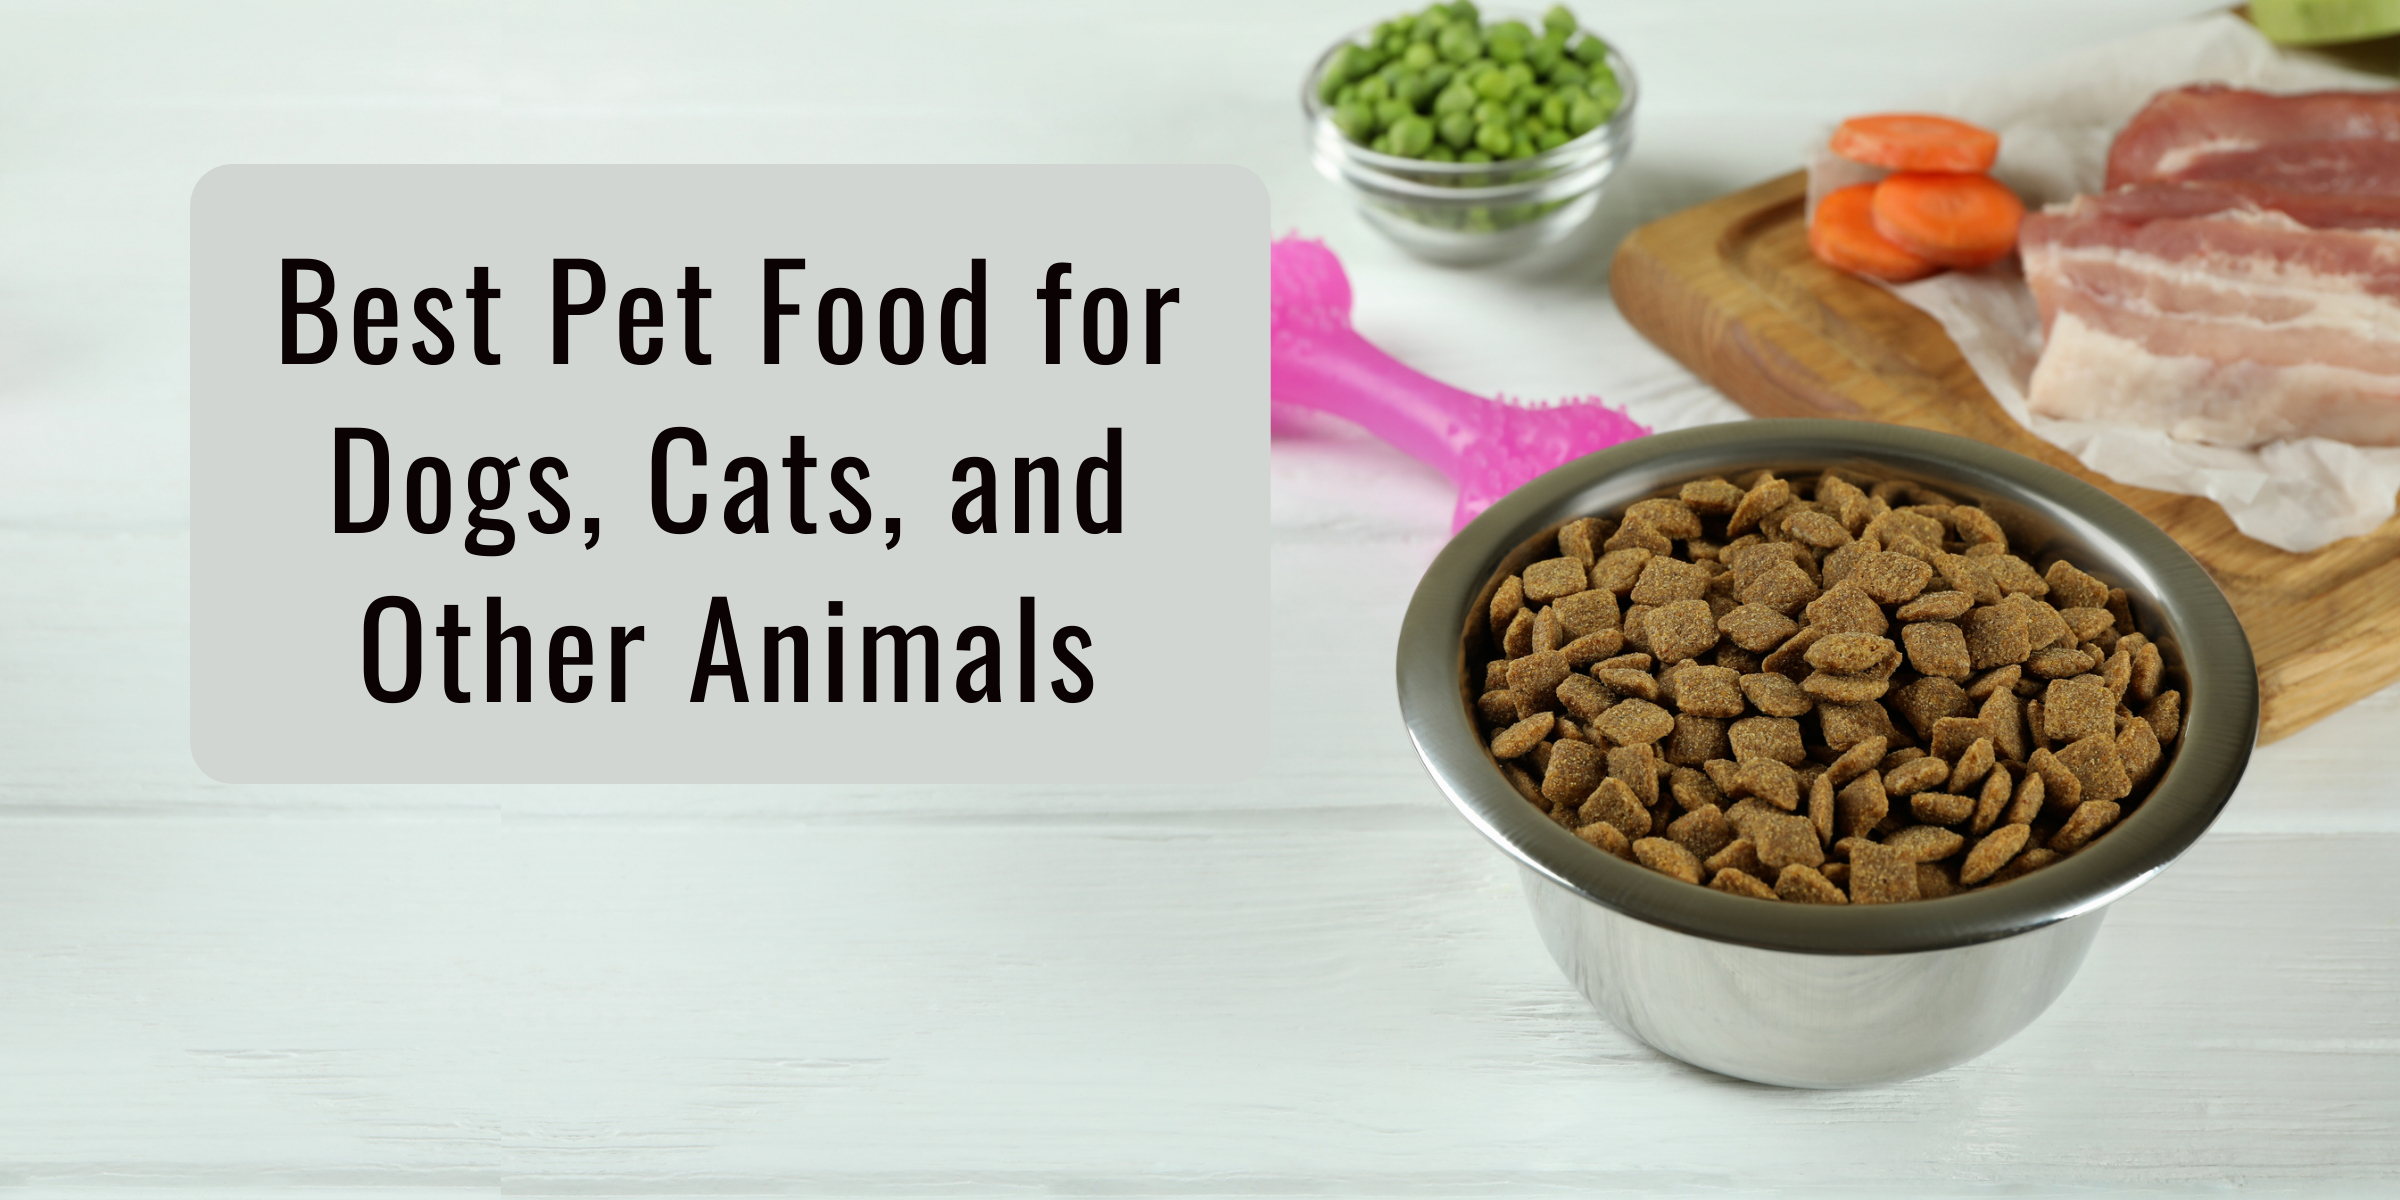 Best Pet Food for Dogs, Cats, and Other Animals